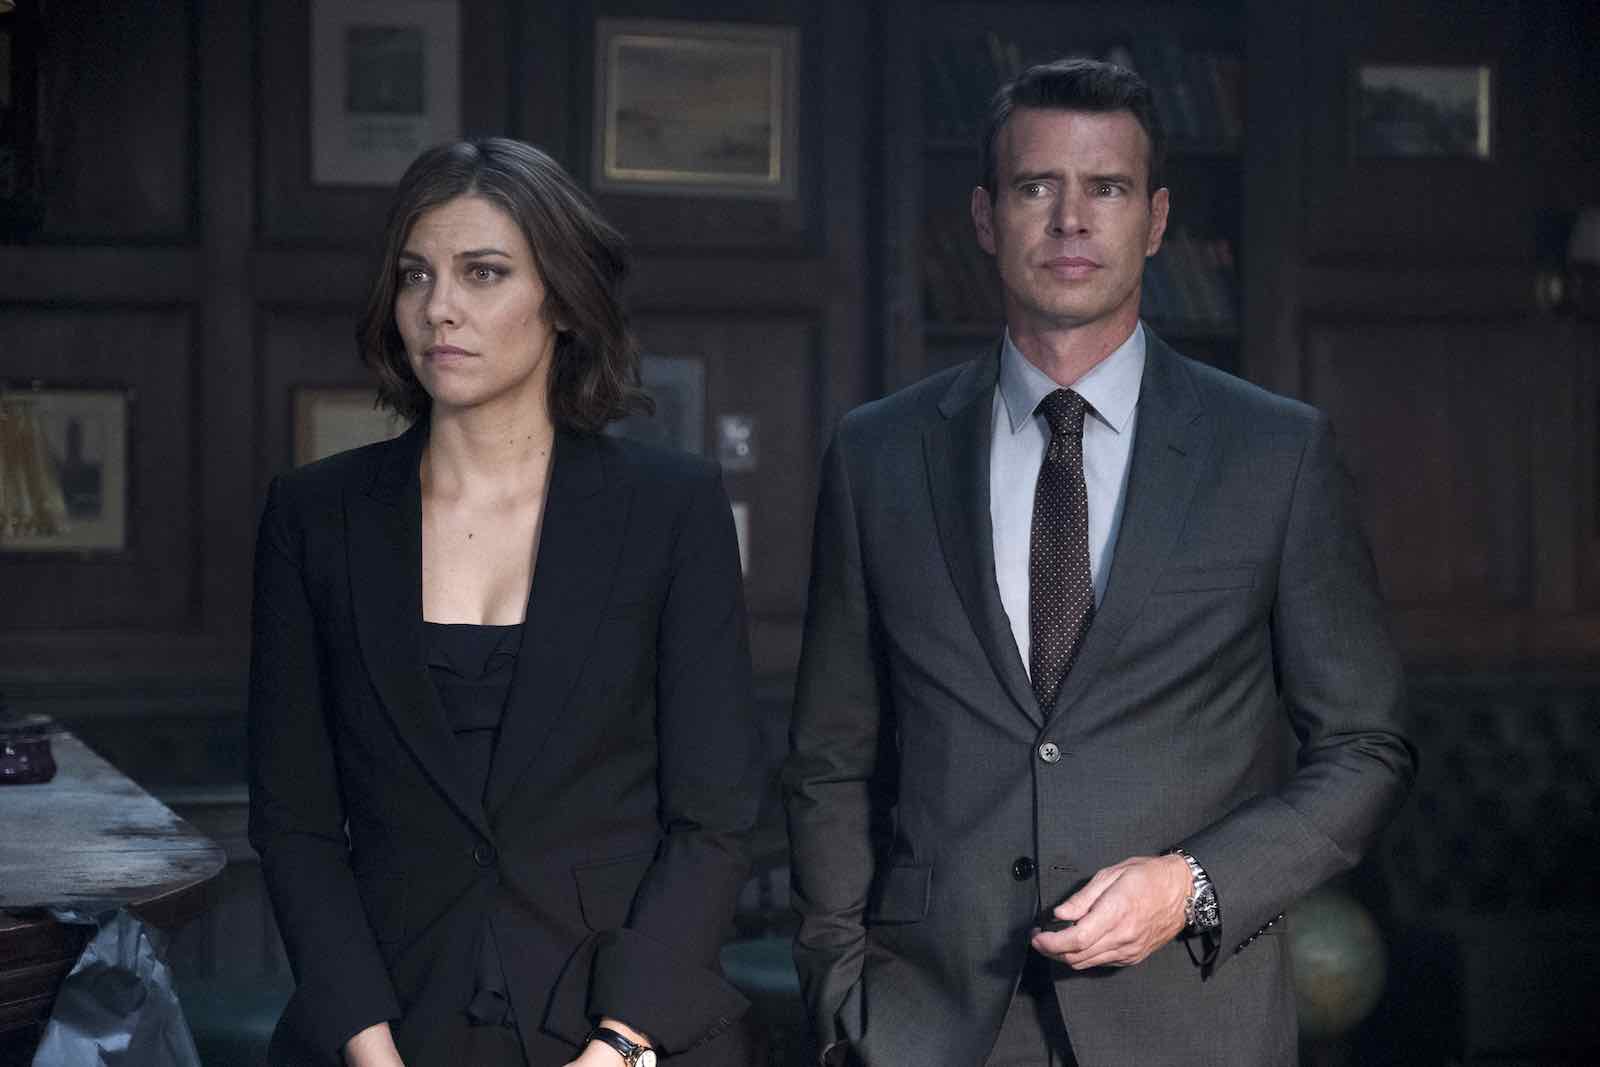 We chatted with 'Whiskey Cavalier' fans about what this ABC show means to them and how they plan to fight back against its cancellation.